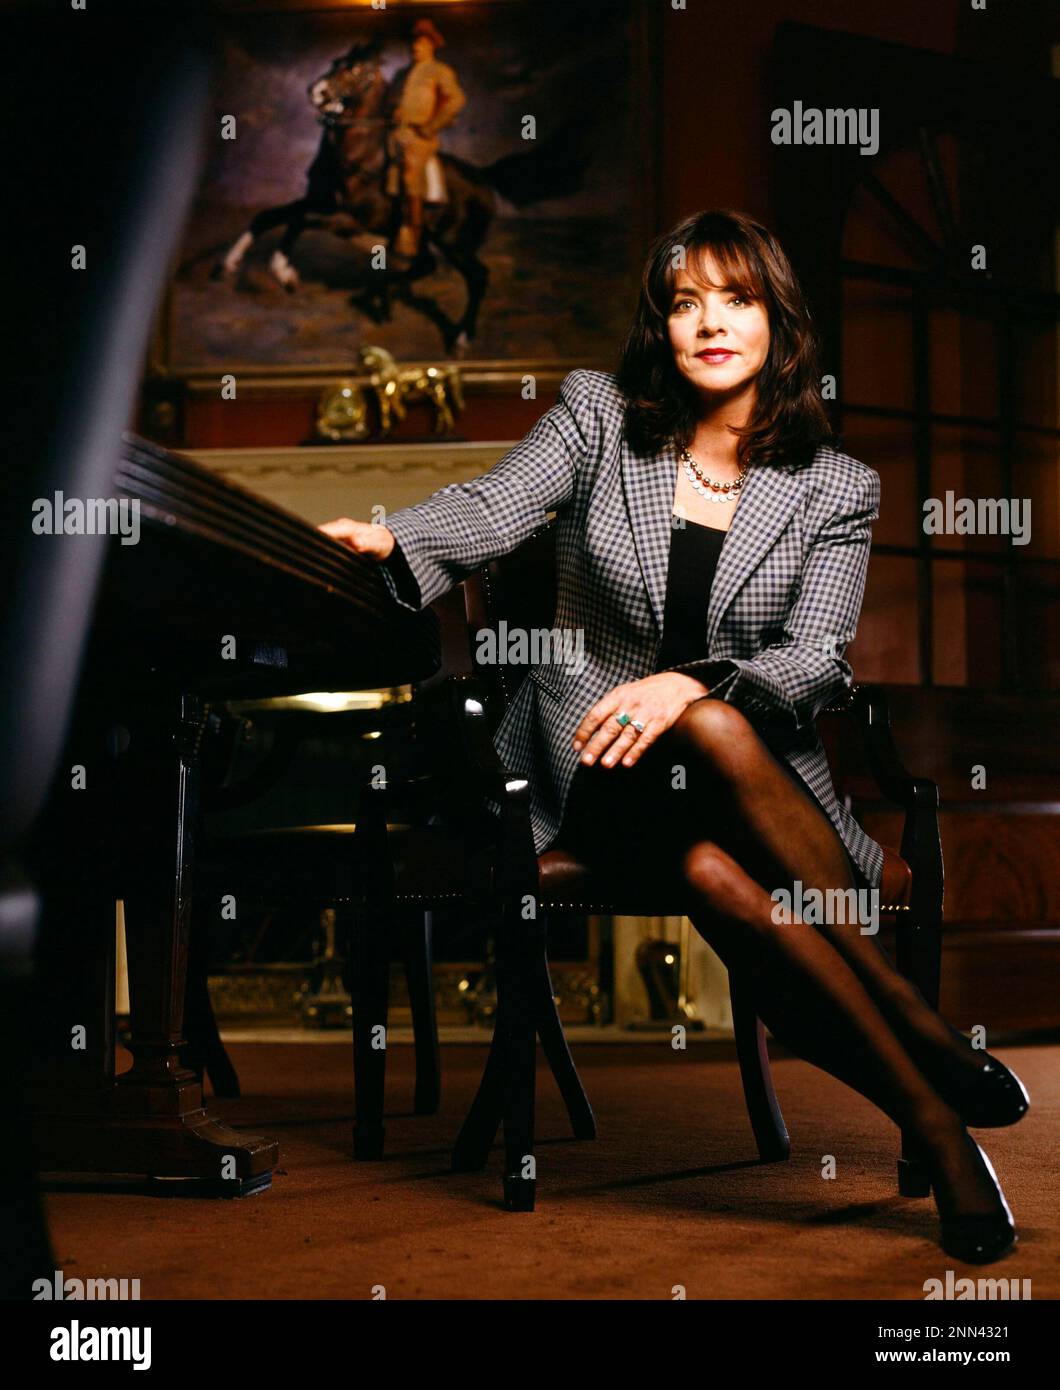 STOCKARD CHANNING in THE WEST WING (1999). Credit: NBC / Album Stock Photo